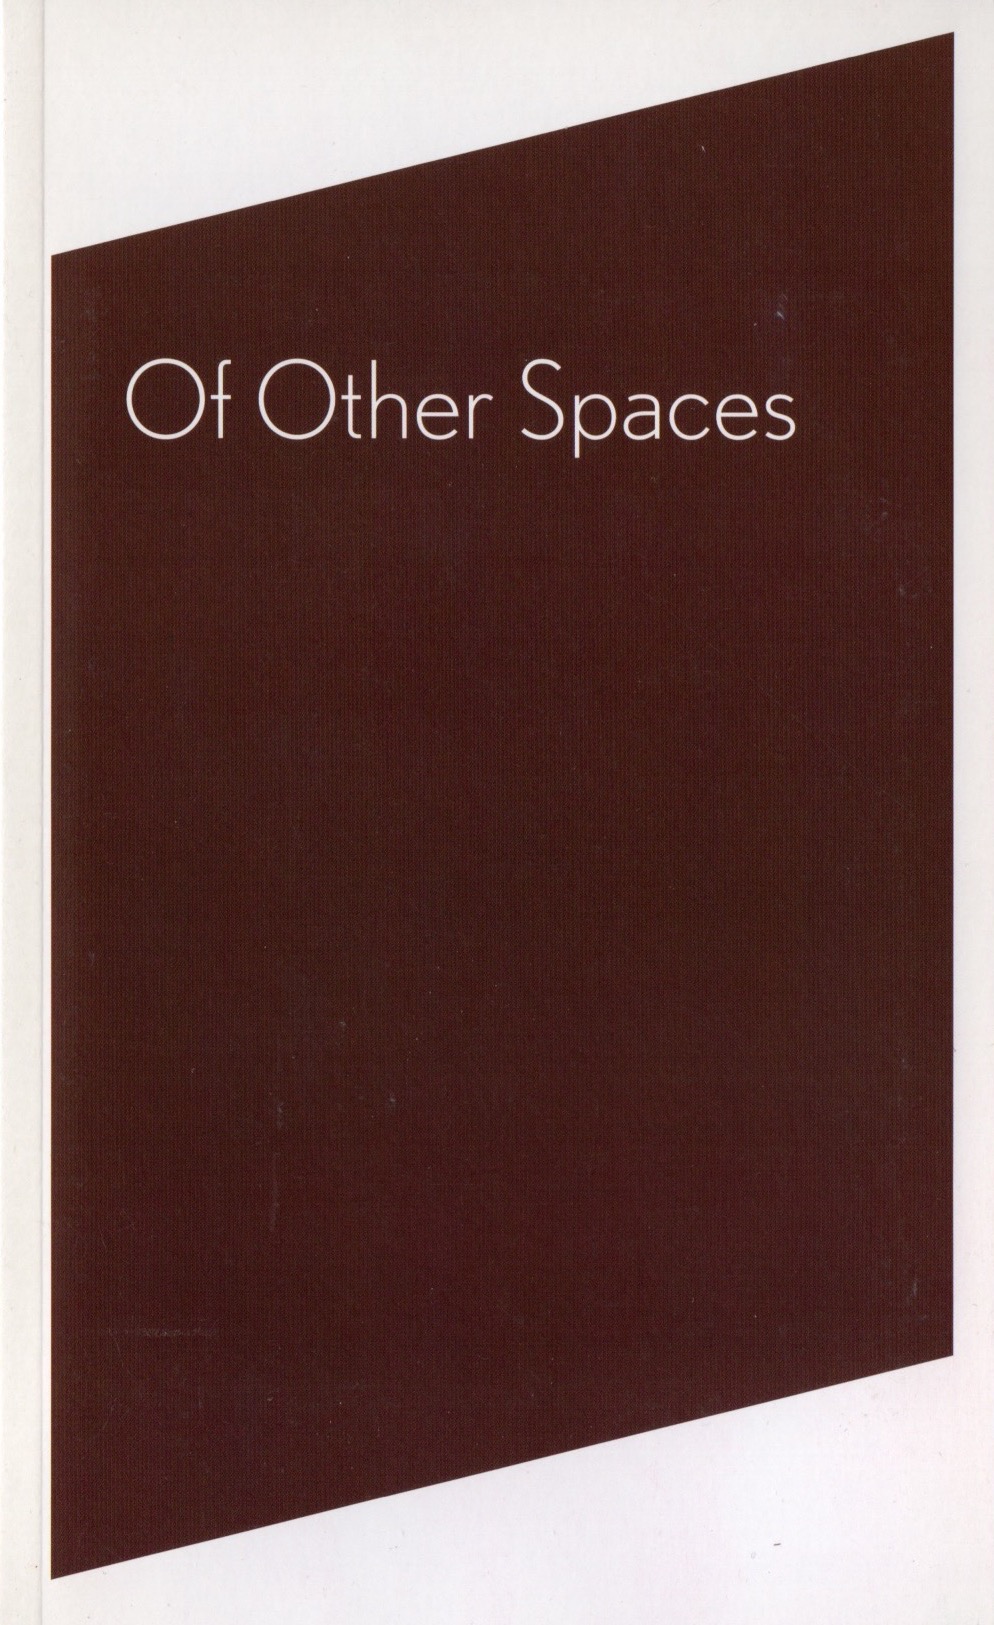 Of Other Spaces.jpg